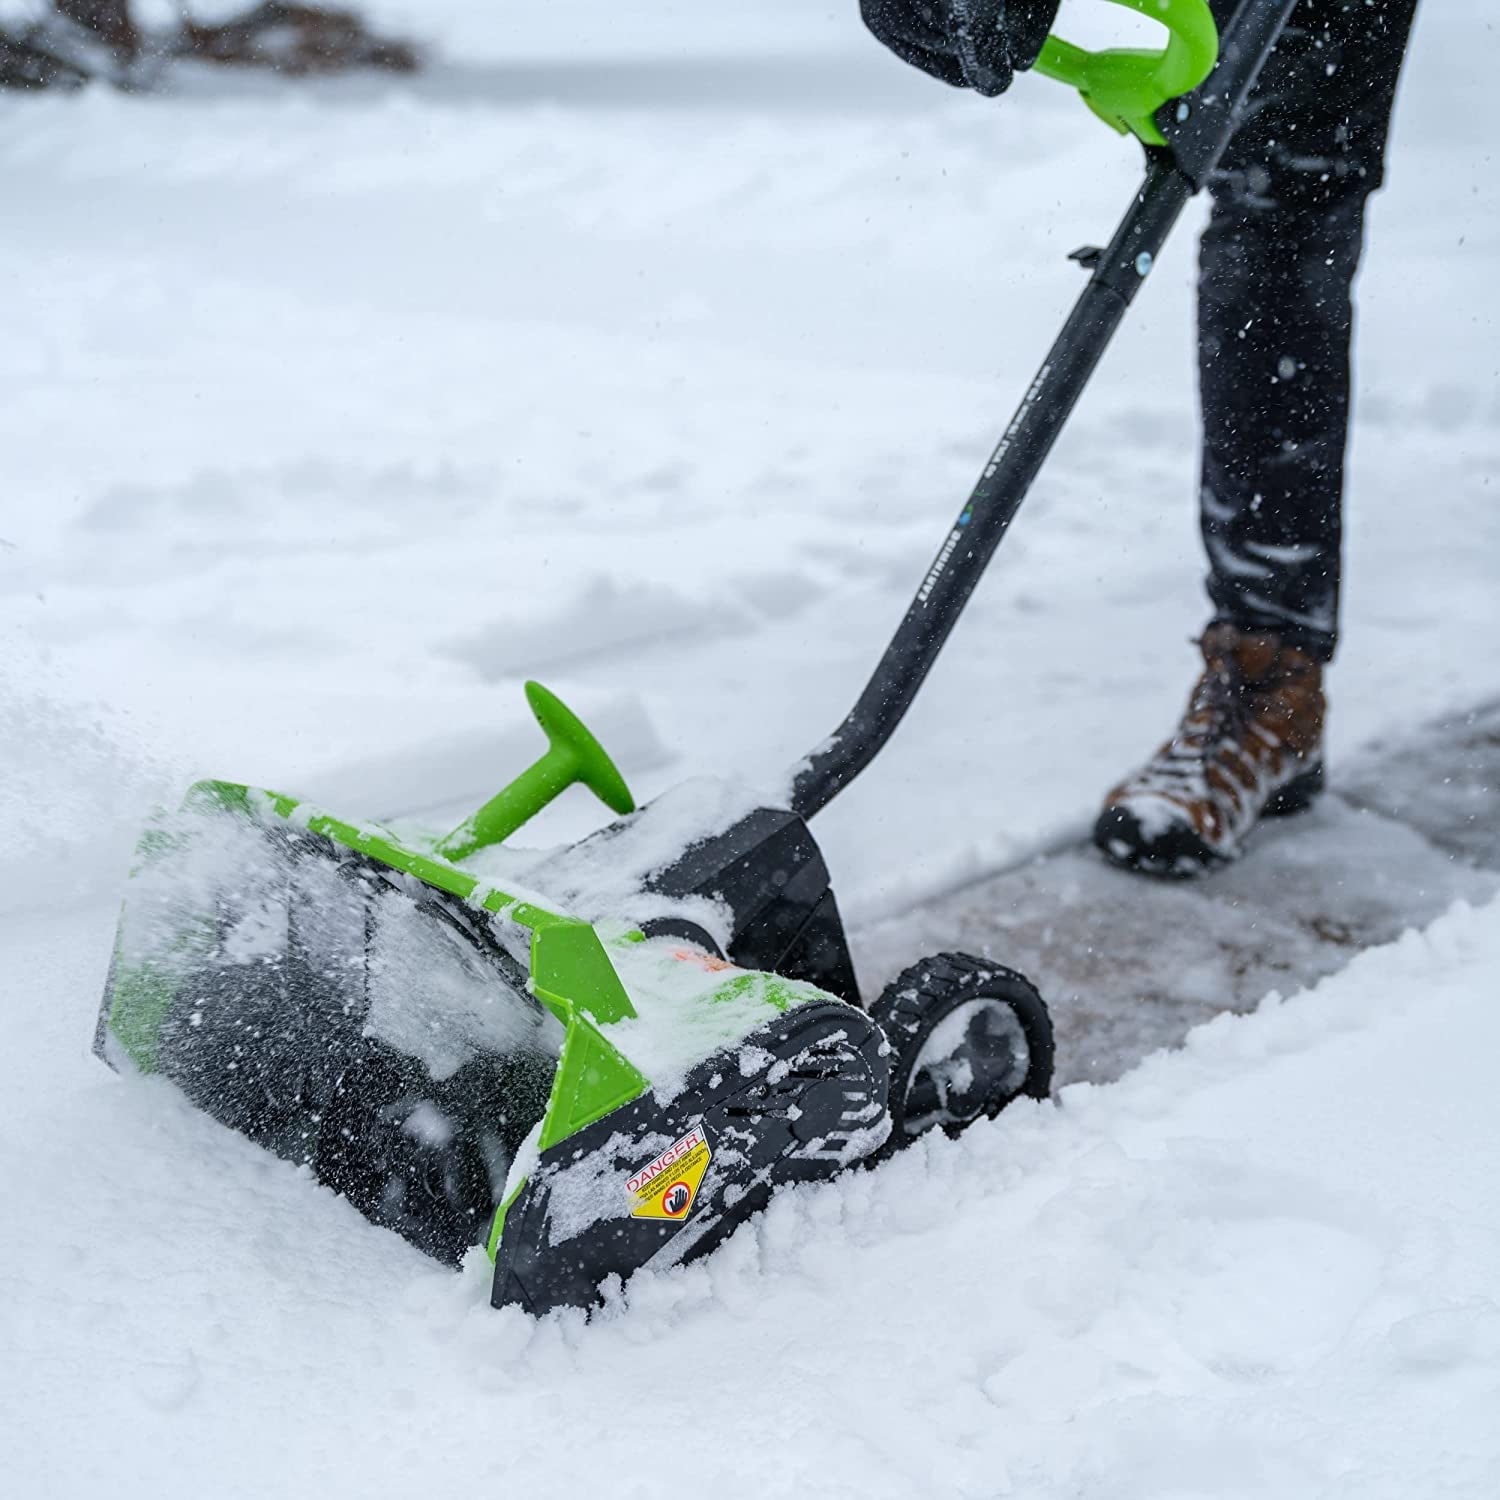 Earthwise 16- Inch Lithium 40 Volt Super Snow Thrower SN74016 On Sale  Bed Bath  Beyond 26482185